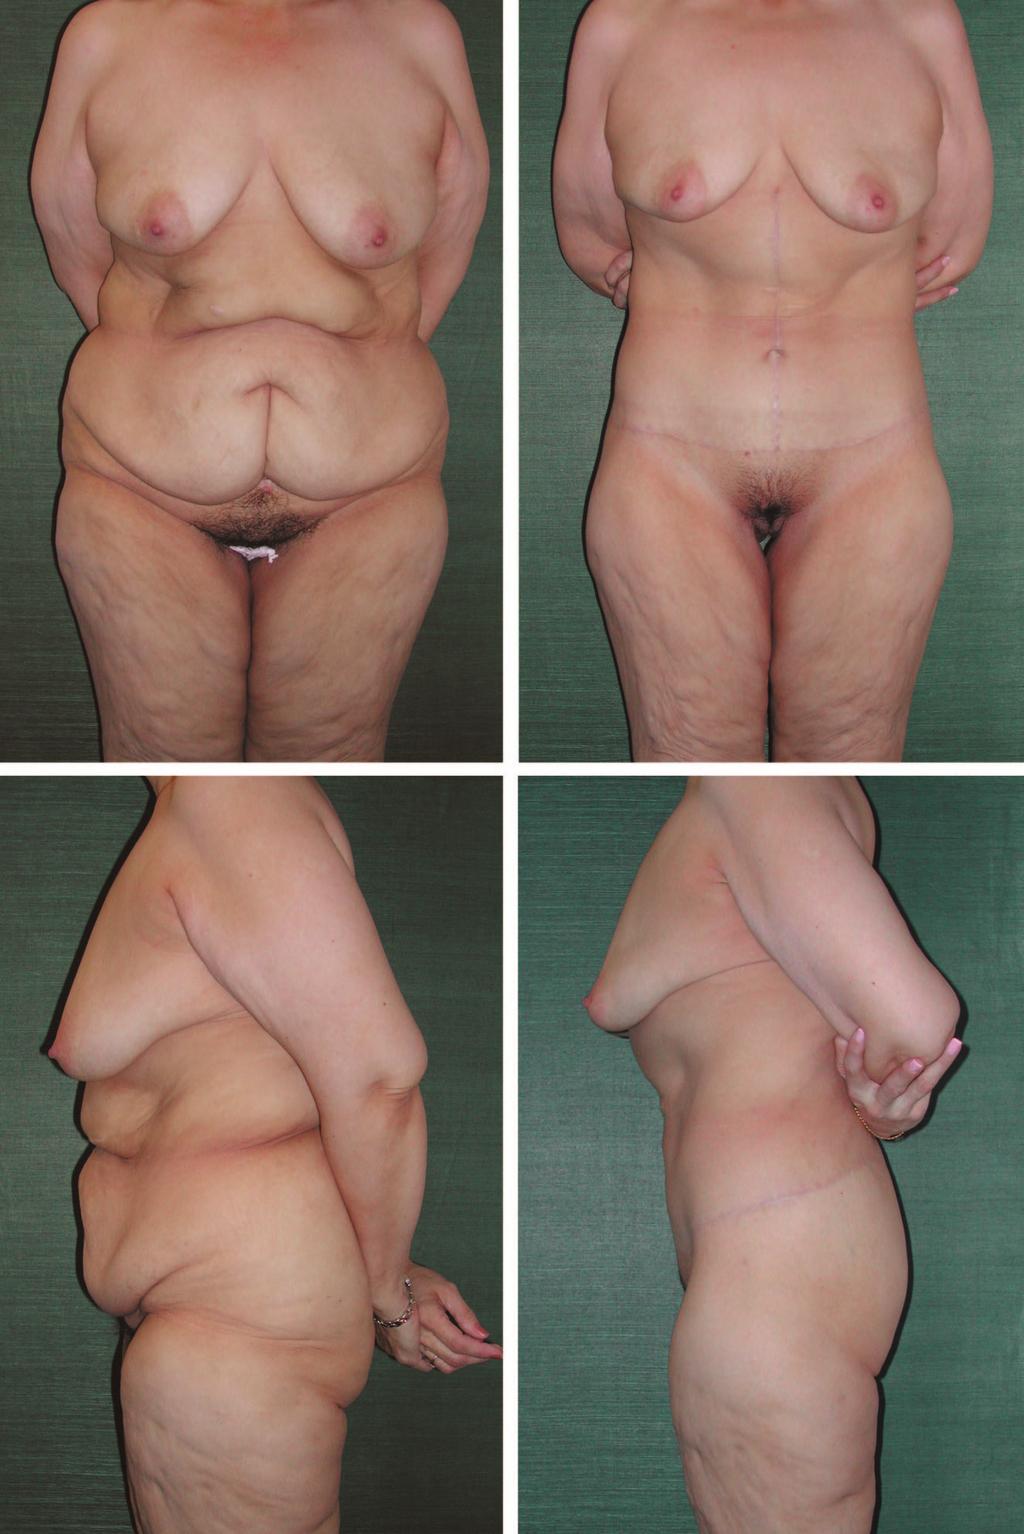 Volume 121, Number 4 Contouring after Massive Weight Loss Fig. 5. A 47-year-old woman, 5 feet 6 inches tall, after a 107-pound weight loss.